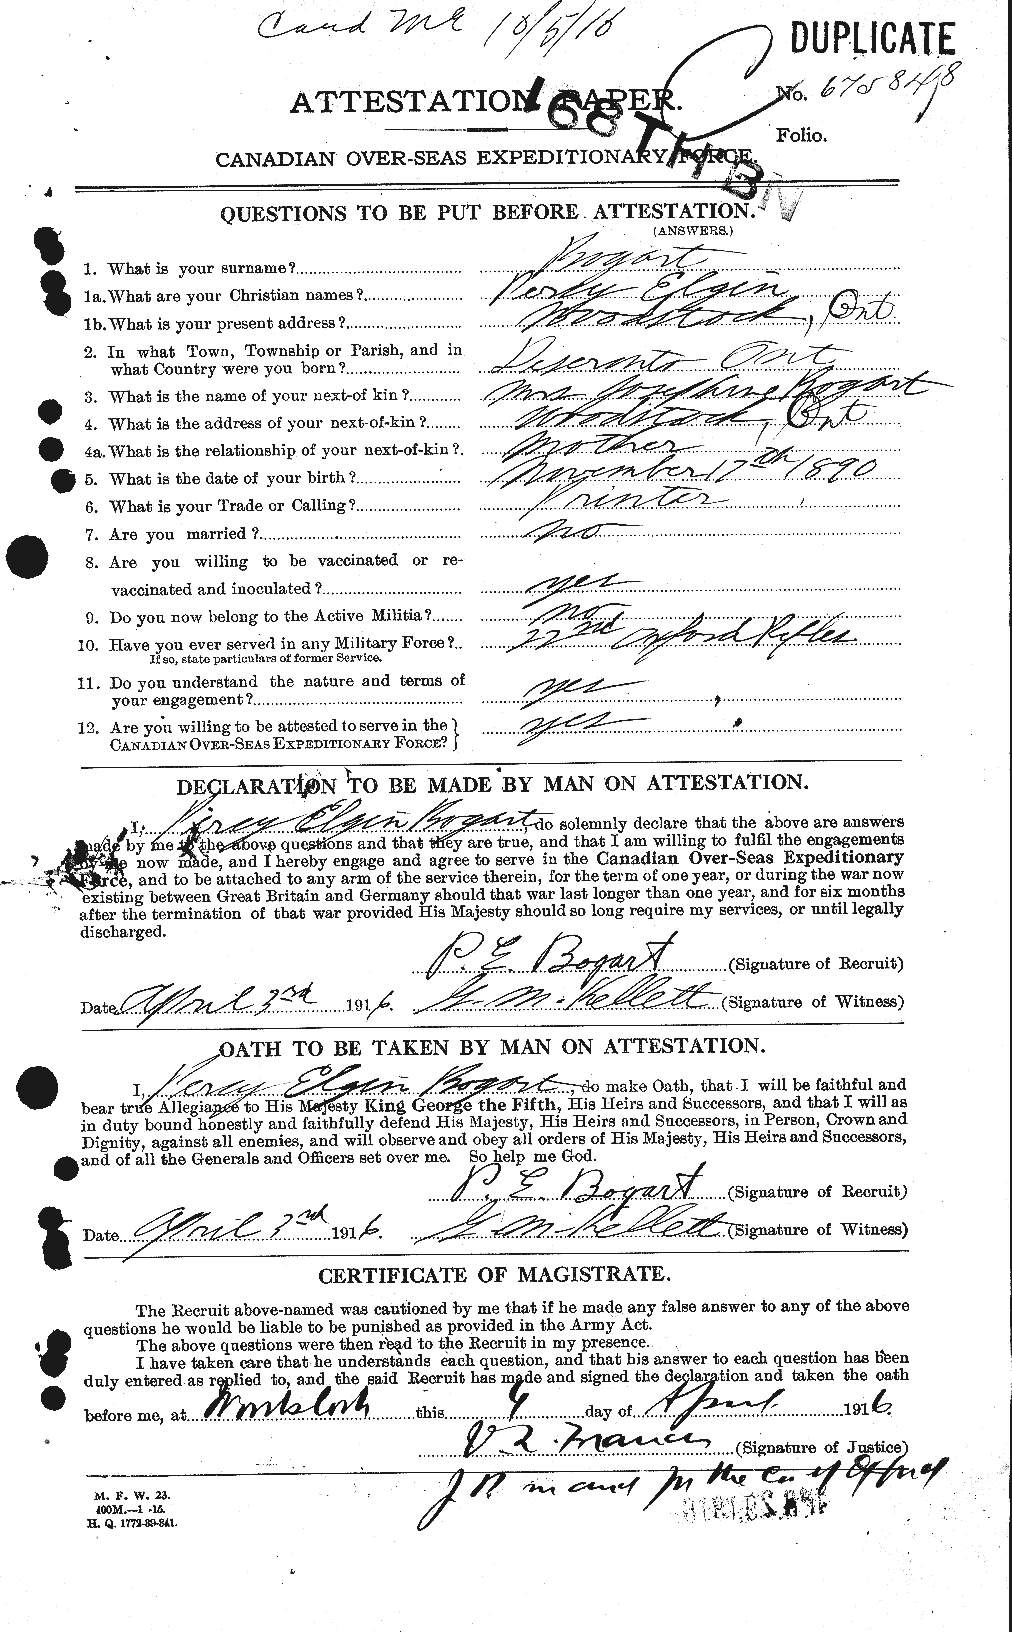 Personnel Records of the First World War - CEF 249210a